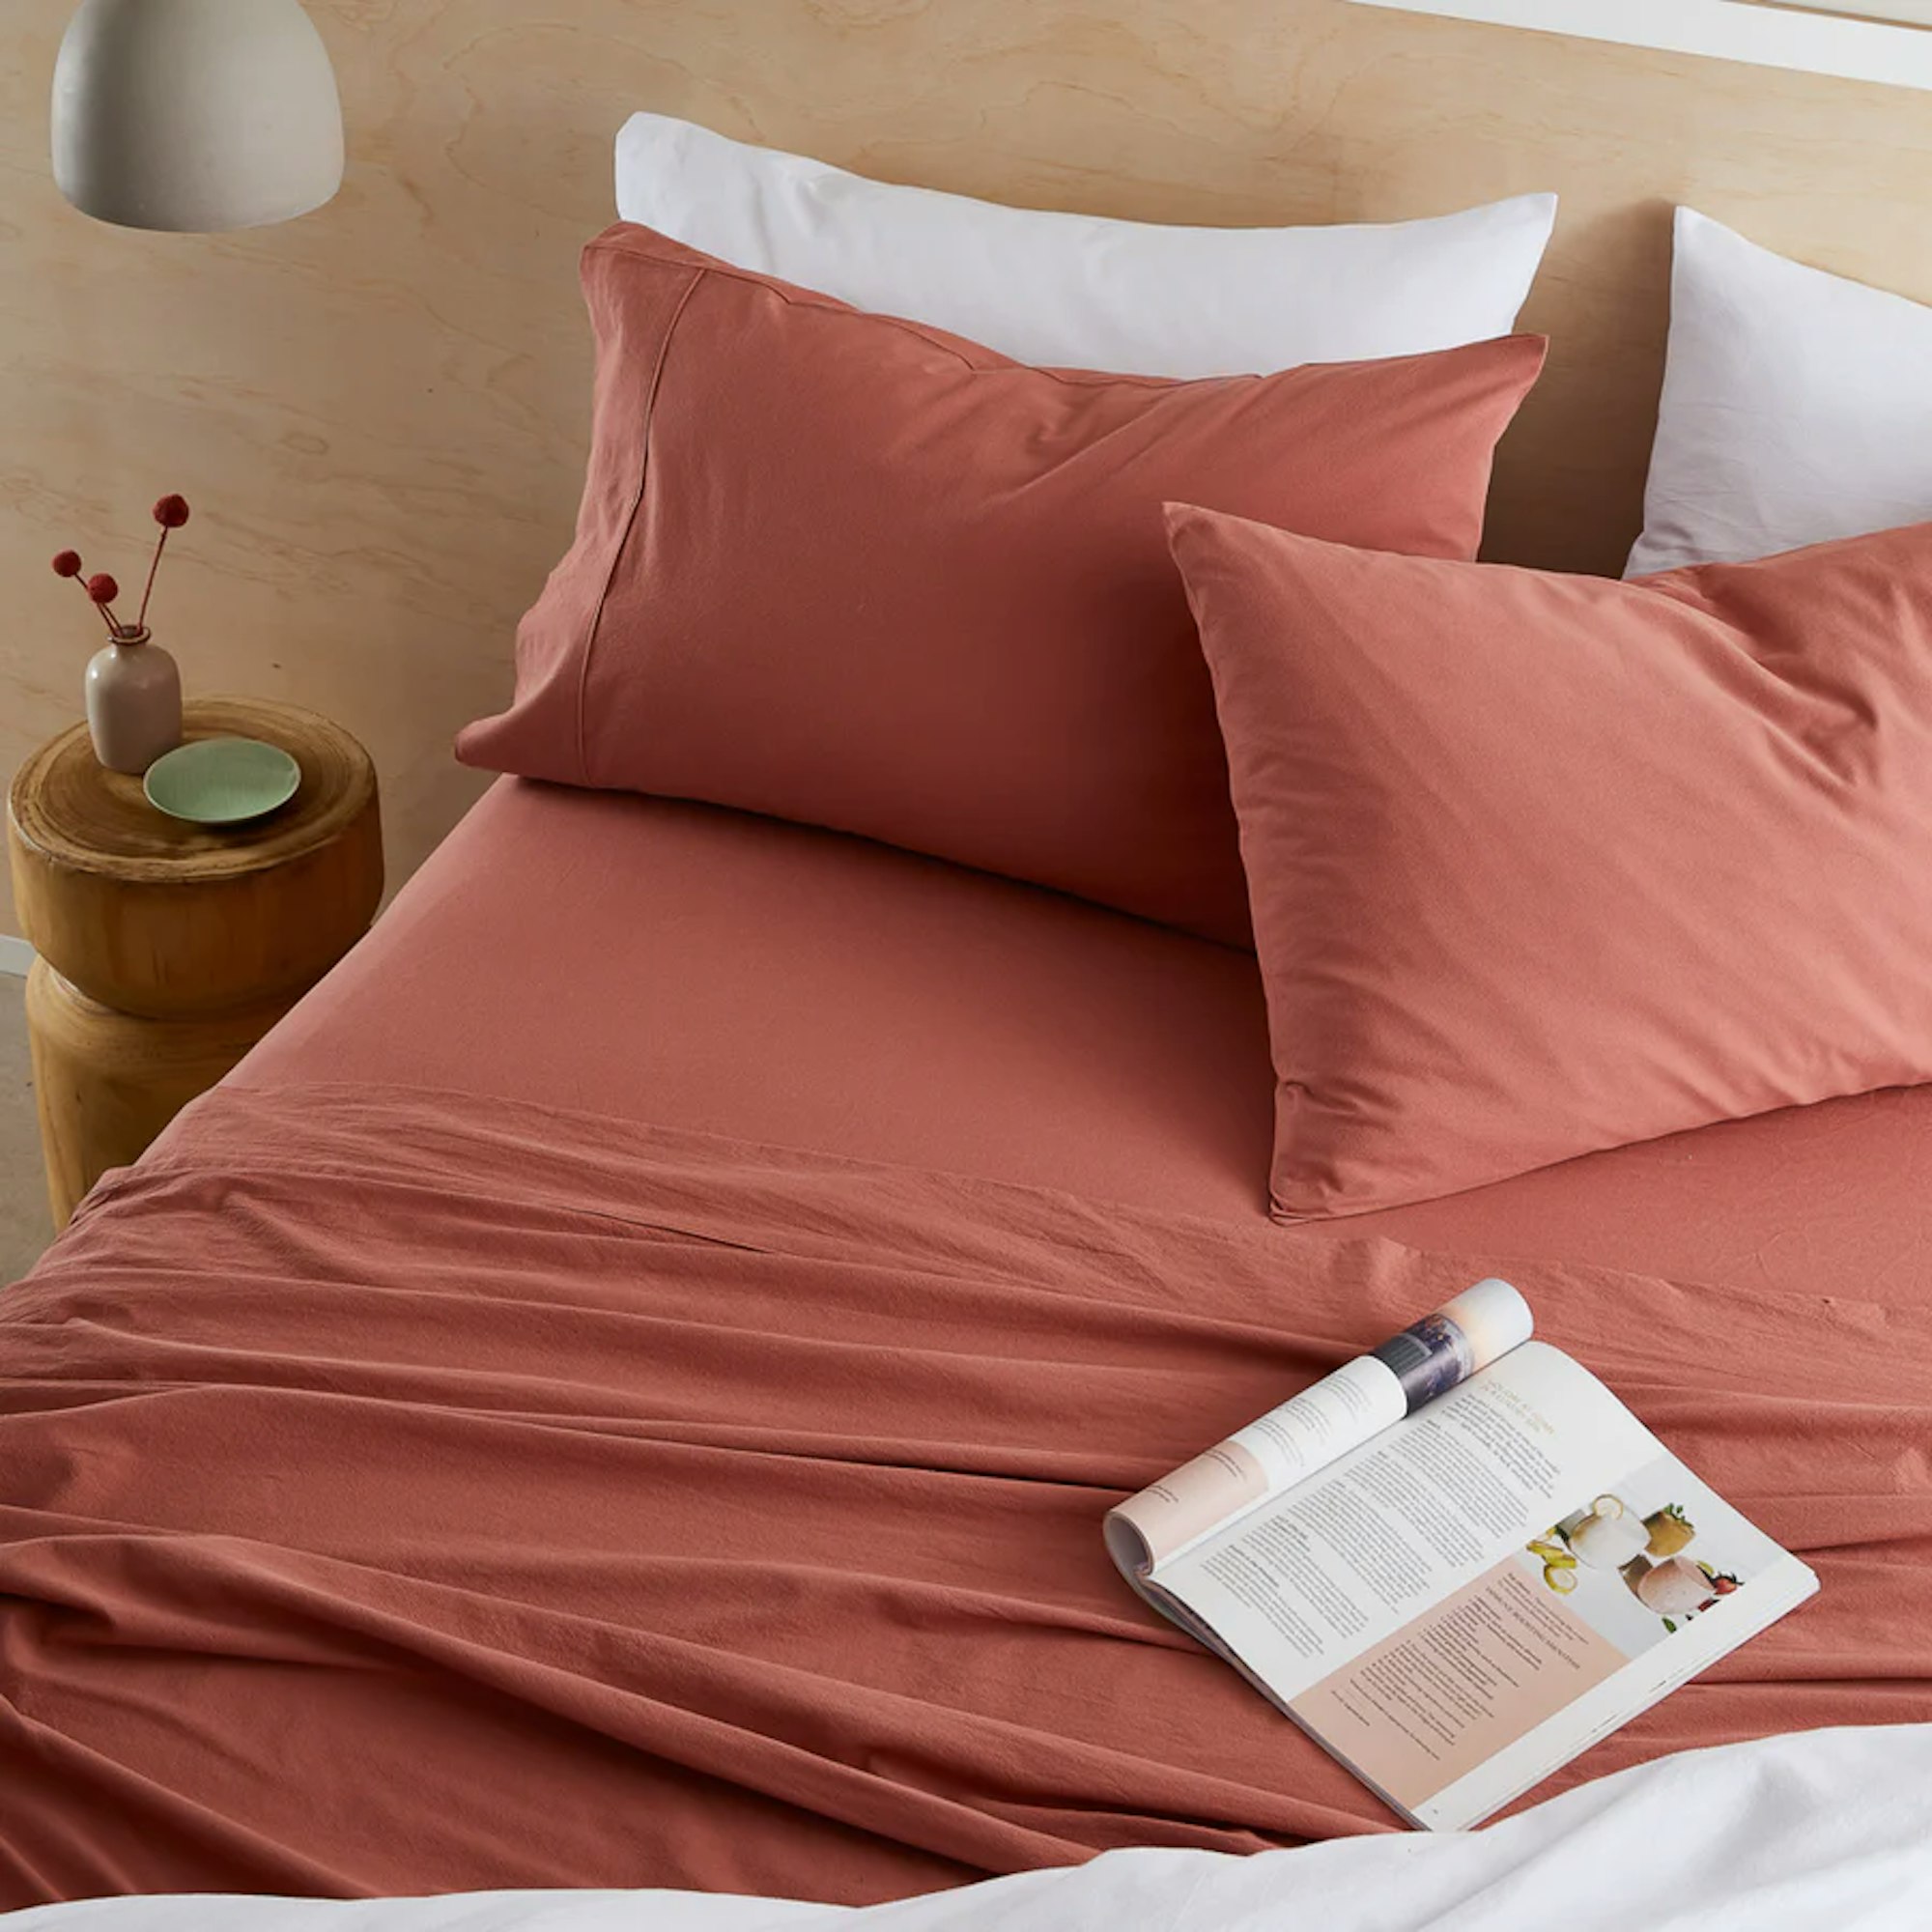 bamboo cotton material bed sheets on bed with book and matching pillows